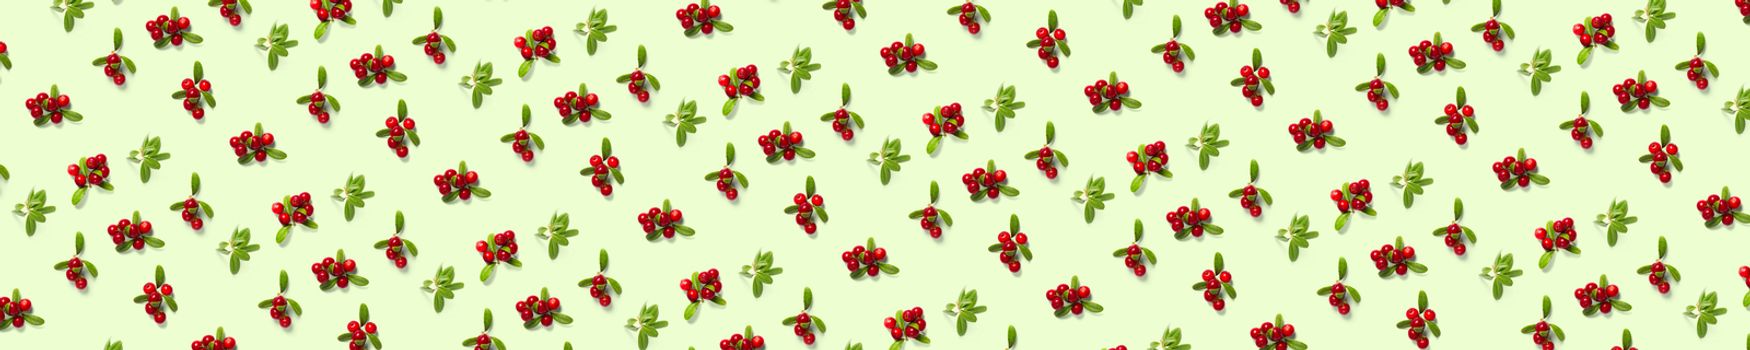 Lingonberry background on green backdrop. Fresh cowberries or cranberries with leaves as autumn or christmas background